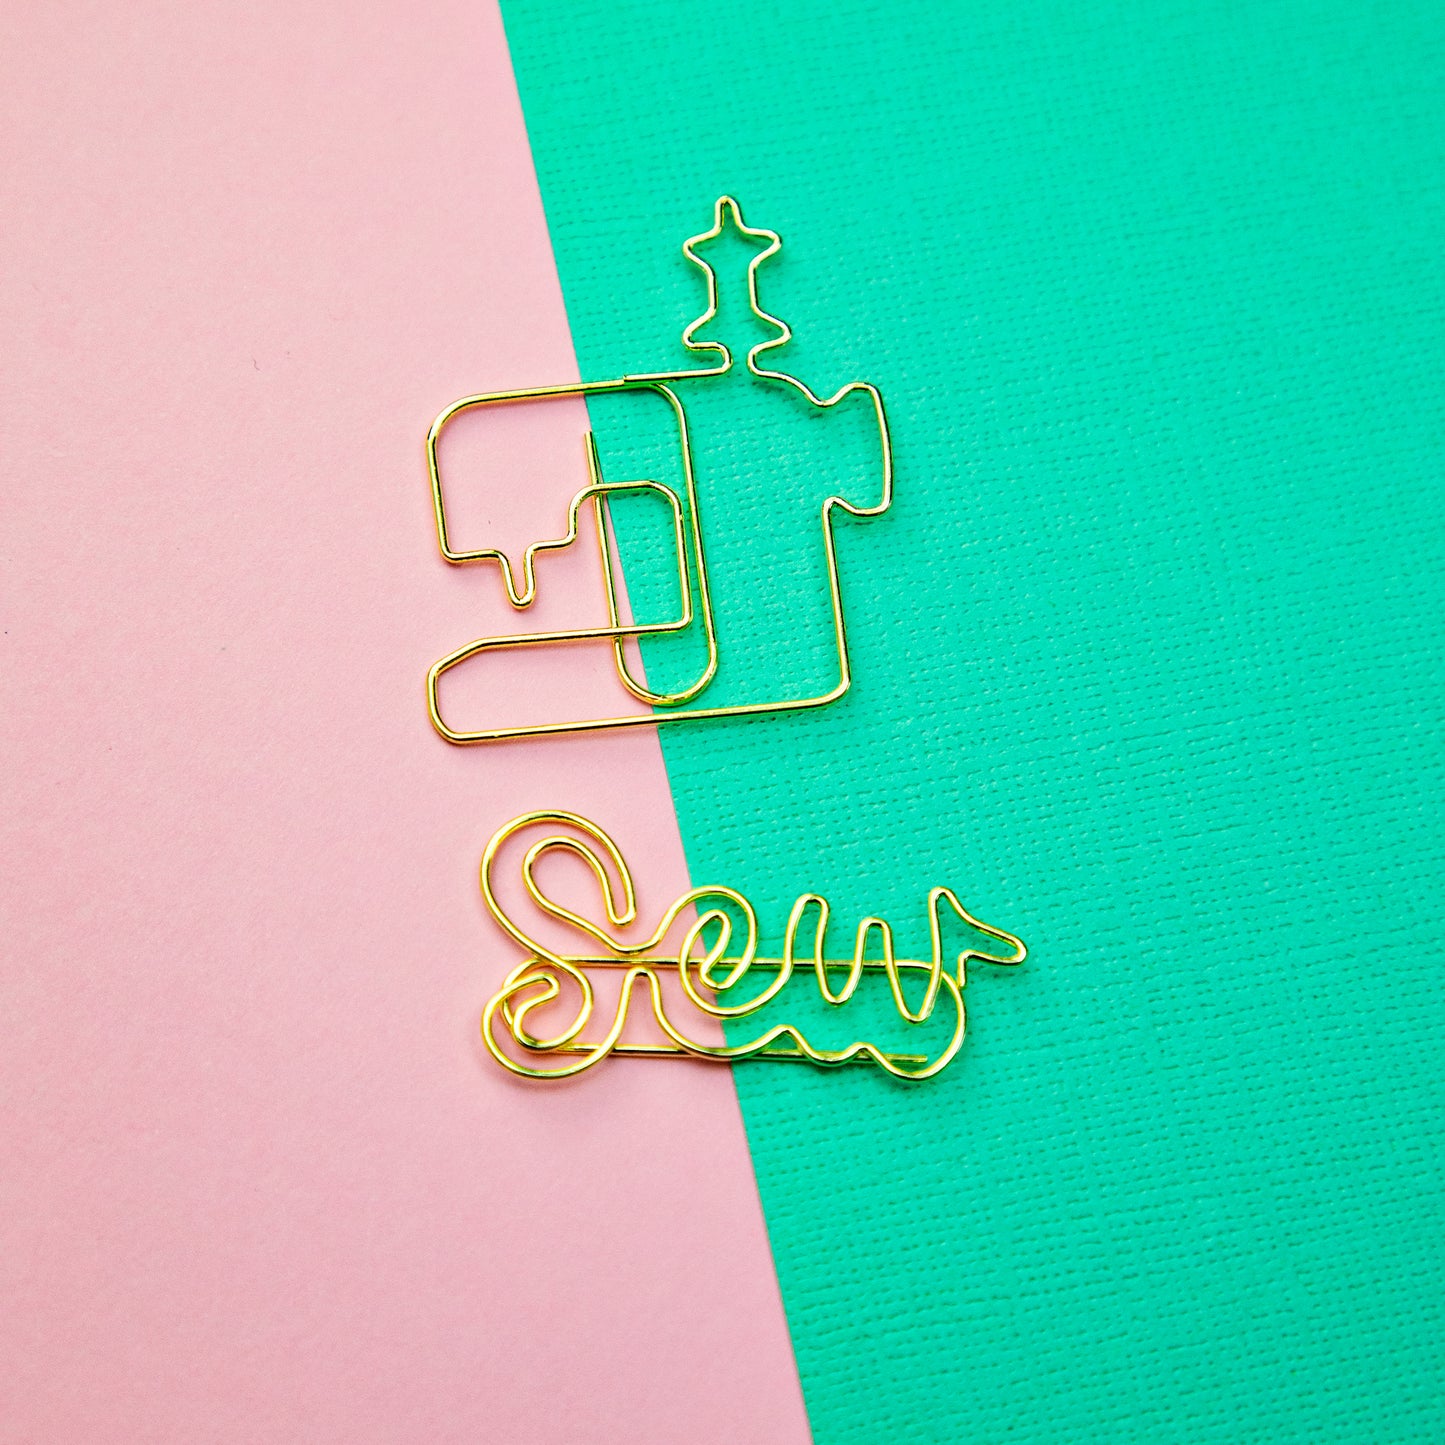 Sewing Machine Paperclips | Sew Paperclips | Gifts for Quilter | Gifts for Sewists | Planner Accessories | Novelty Paperclip